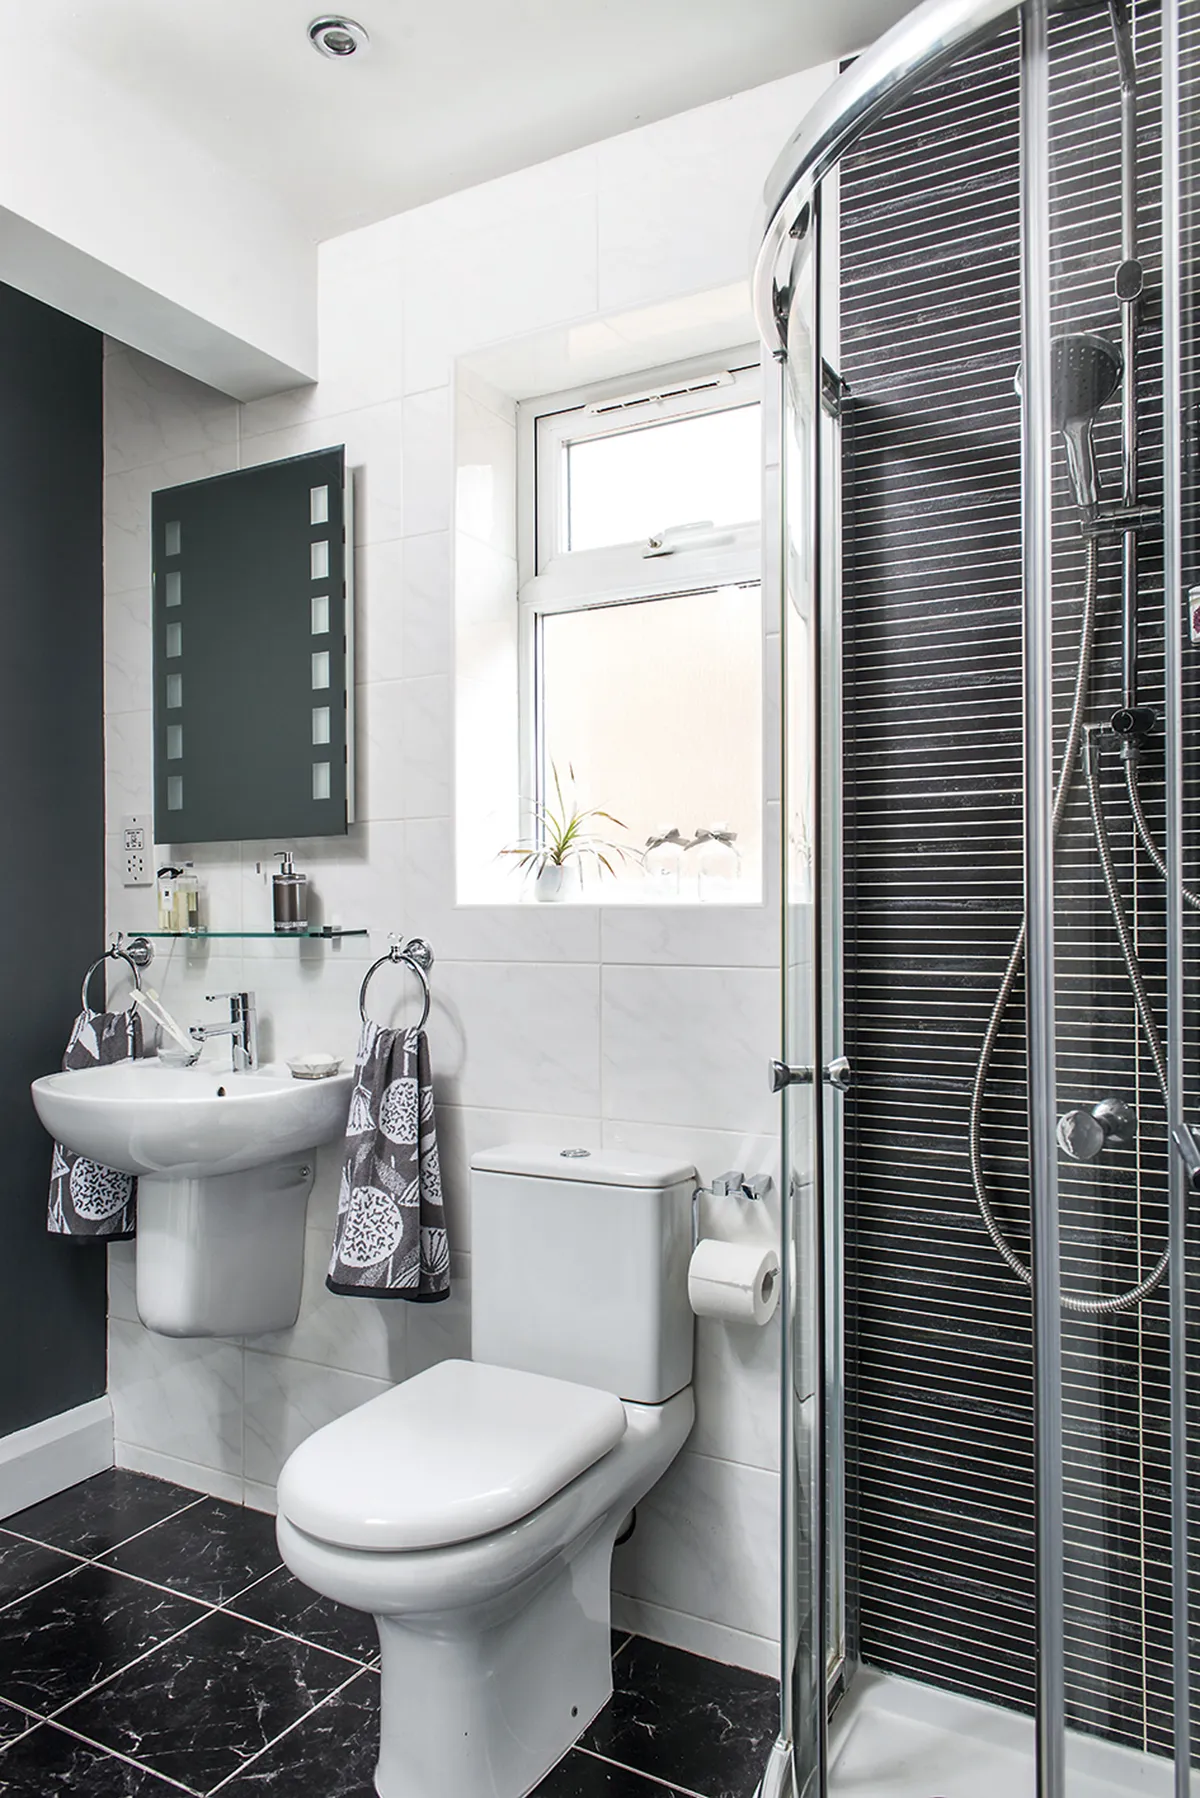 Sarah chose three different tiles from Supatile, going for a monochrome scheme to tie the styles together, complemented by graphic towels from Dunelm. Black marble floor tiles give a luxe spa feel, while narrow tiles in the shower zone the space